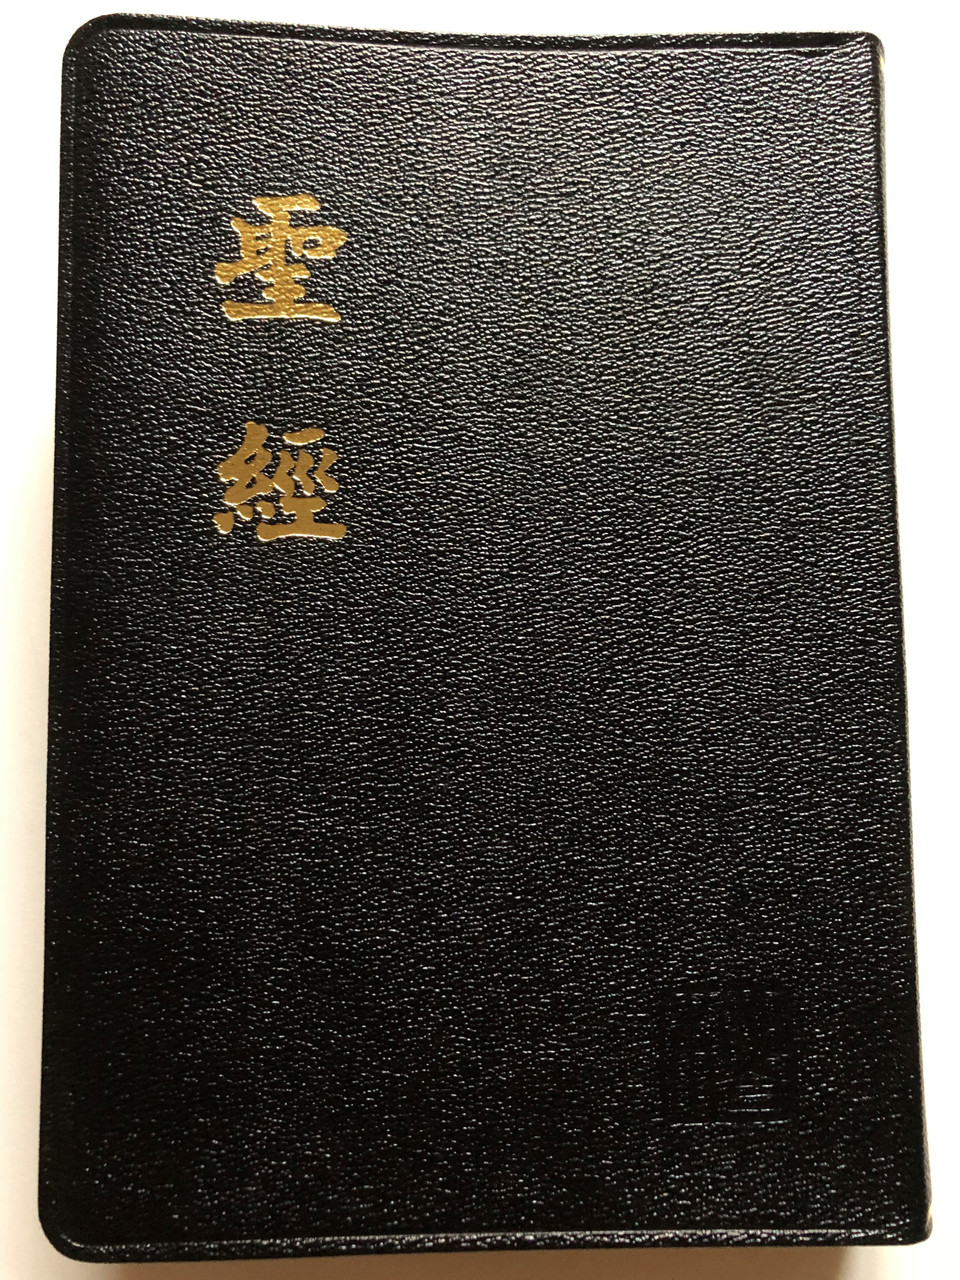 https://cdn10.bigcommerce.com/s-62bdpkt7pb/products/50657/images/258358/Shangti_Edition_Chinese_Holy_Bible_1__53148.1668176442.1280.1280.JPG?c=2